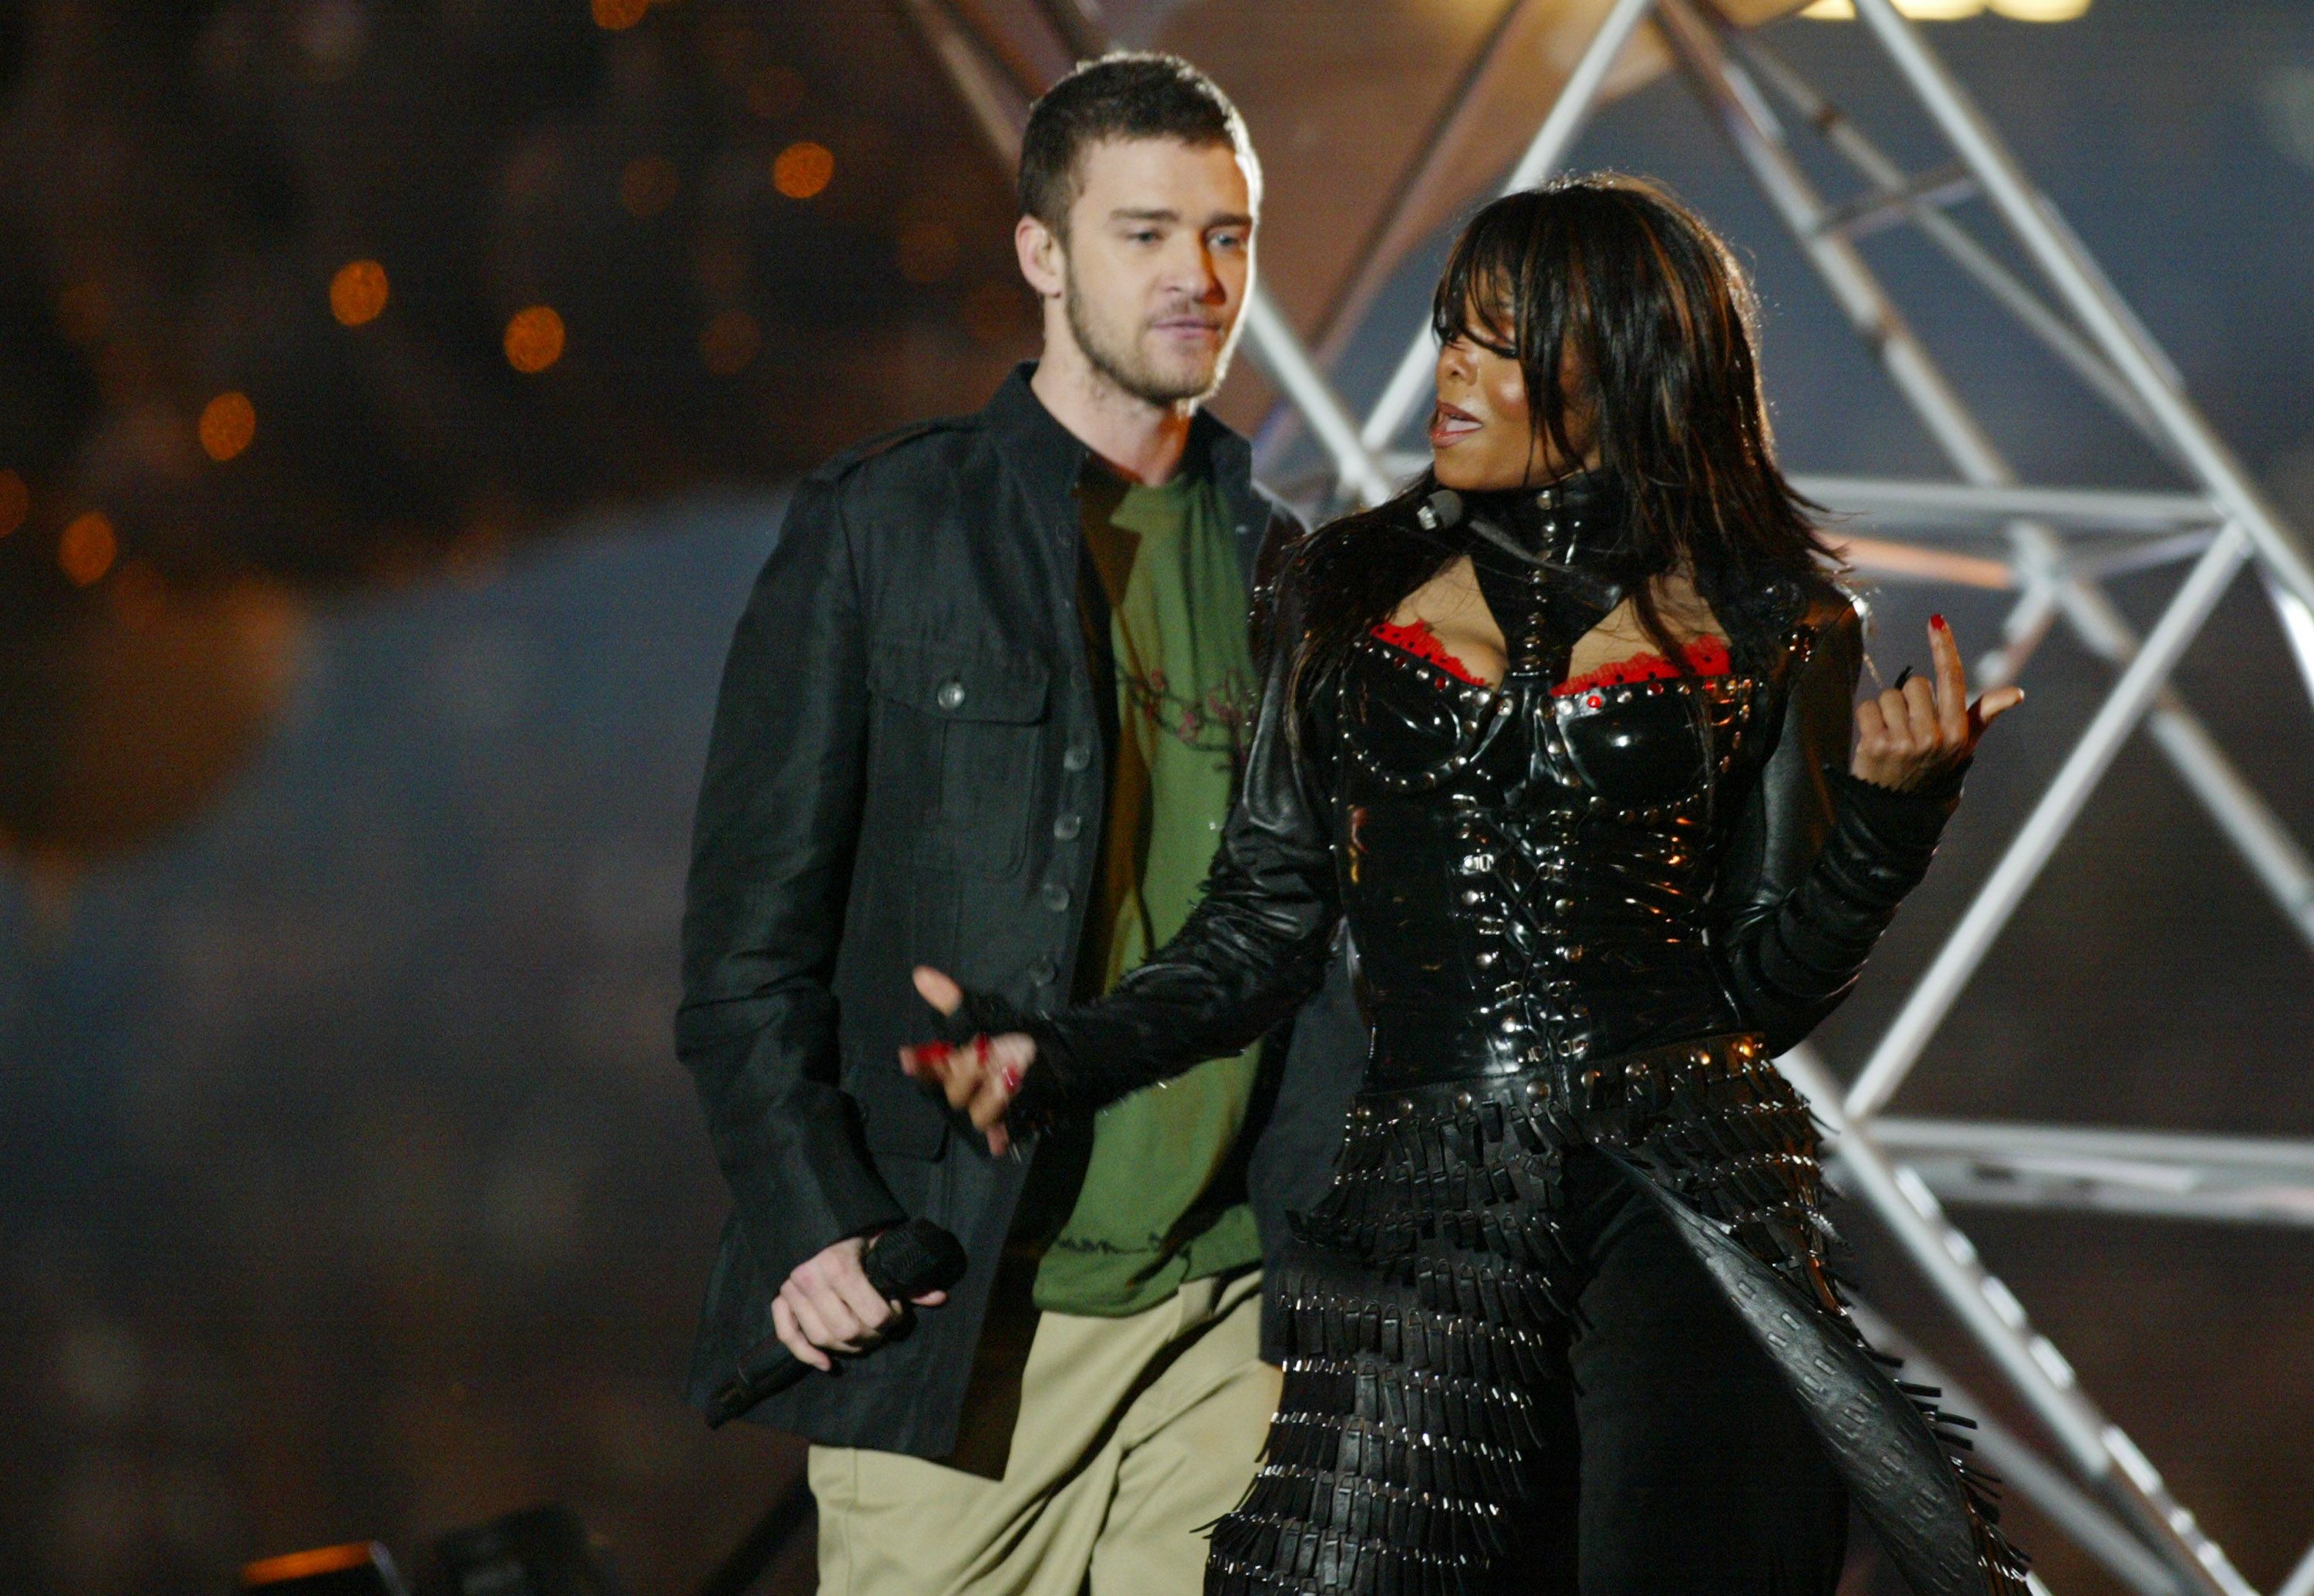 Justin Timberlake and Janet Jackson at the Super Bowl XXXVIII halftime show in Houston, Texas | Source: Getty Images